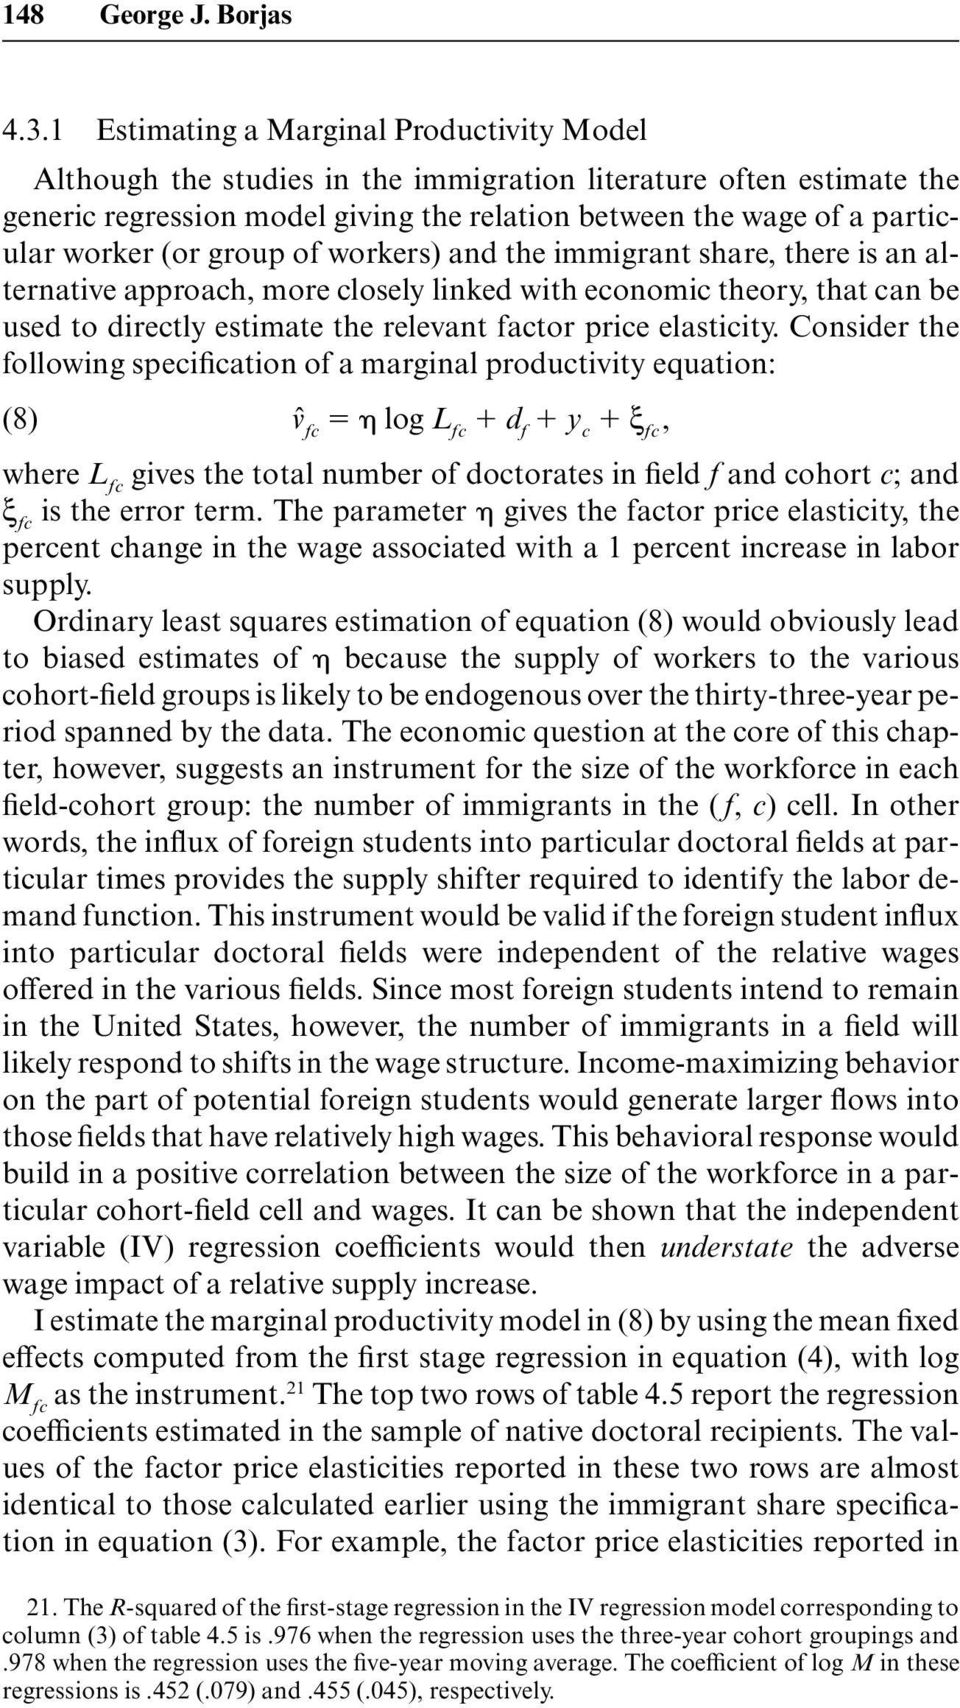 (or group of workers) and the immigrant share, there is an alternative approach, more closely linked with economic theory, that can be used to directly estimate the relevant factor price elasticity.